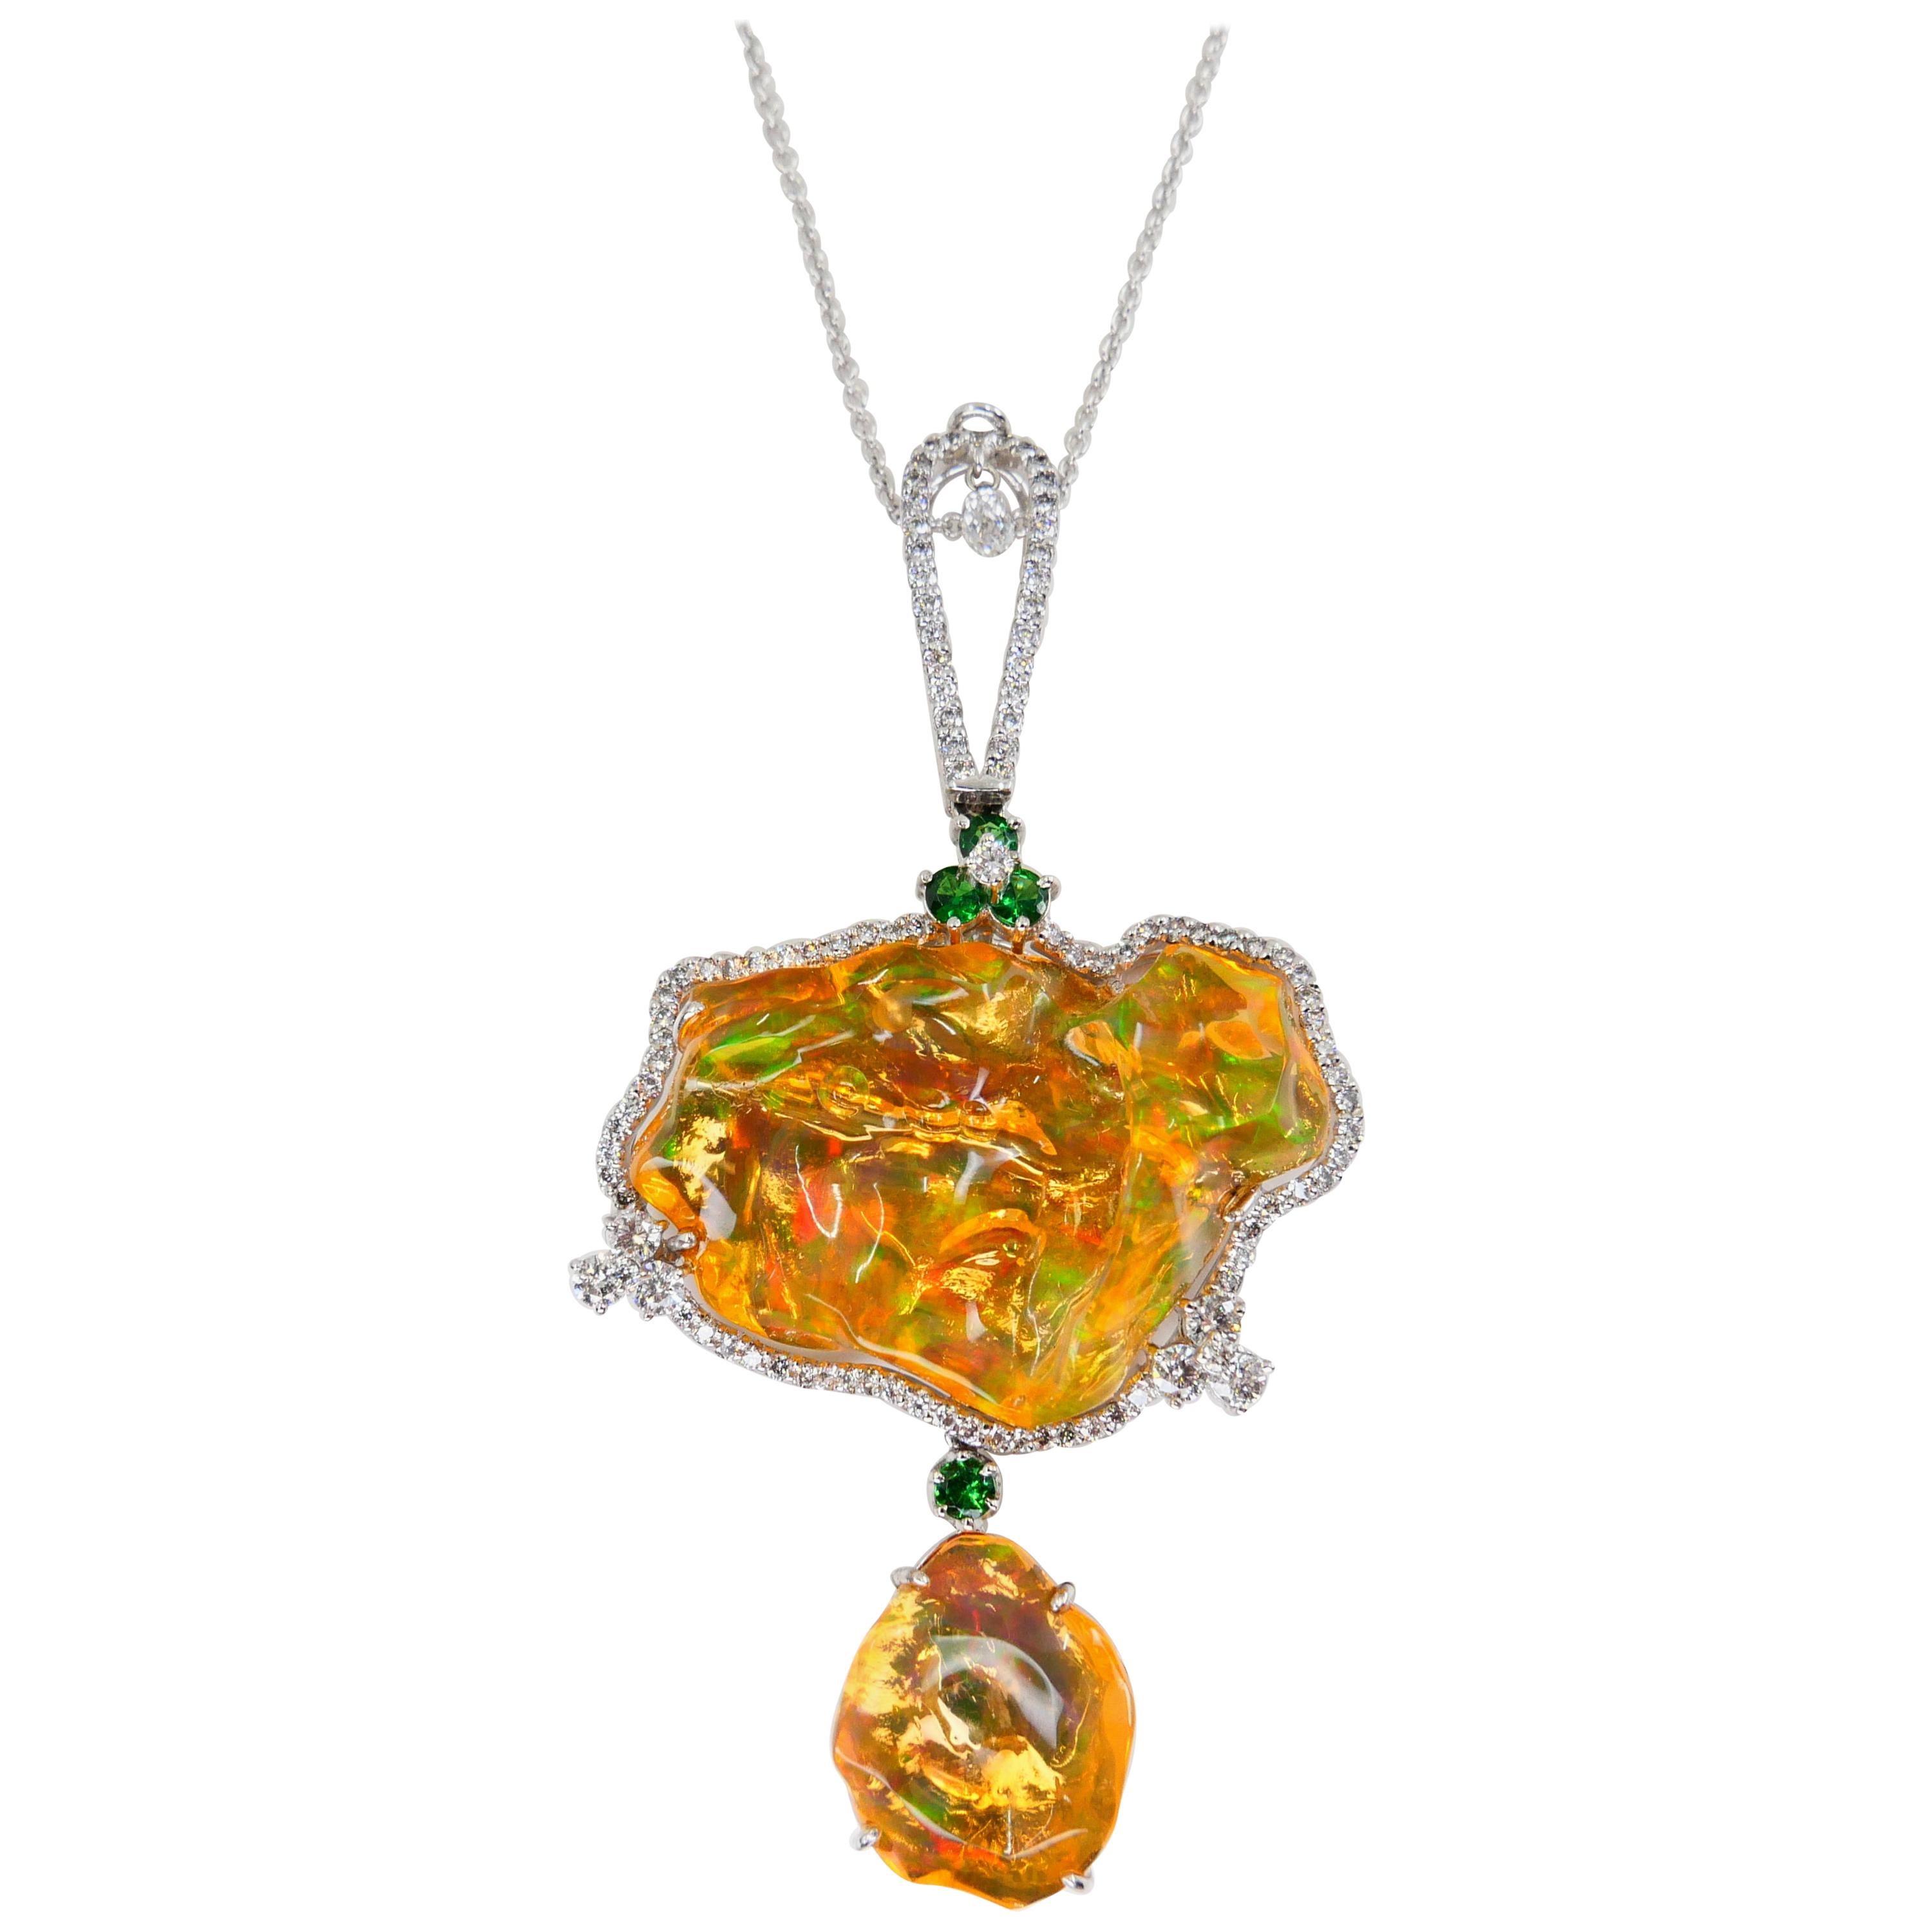 Certified Mexican Fire Opal, Tsavorites, & Diamond Pendant, Superb Play of Color